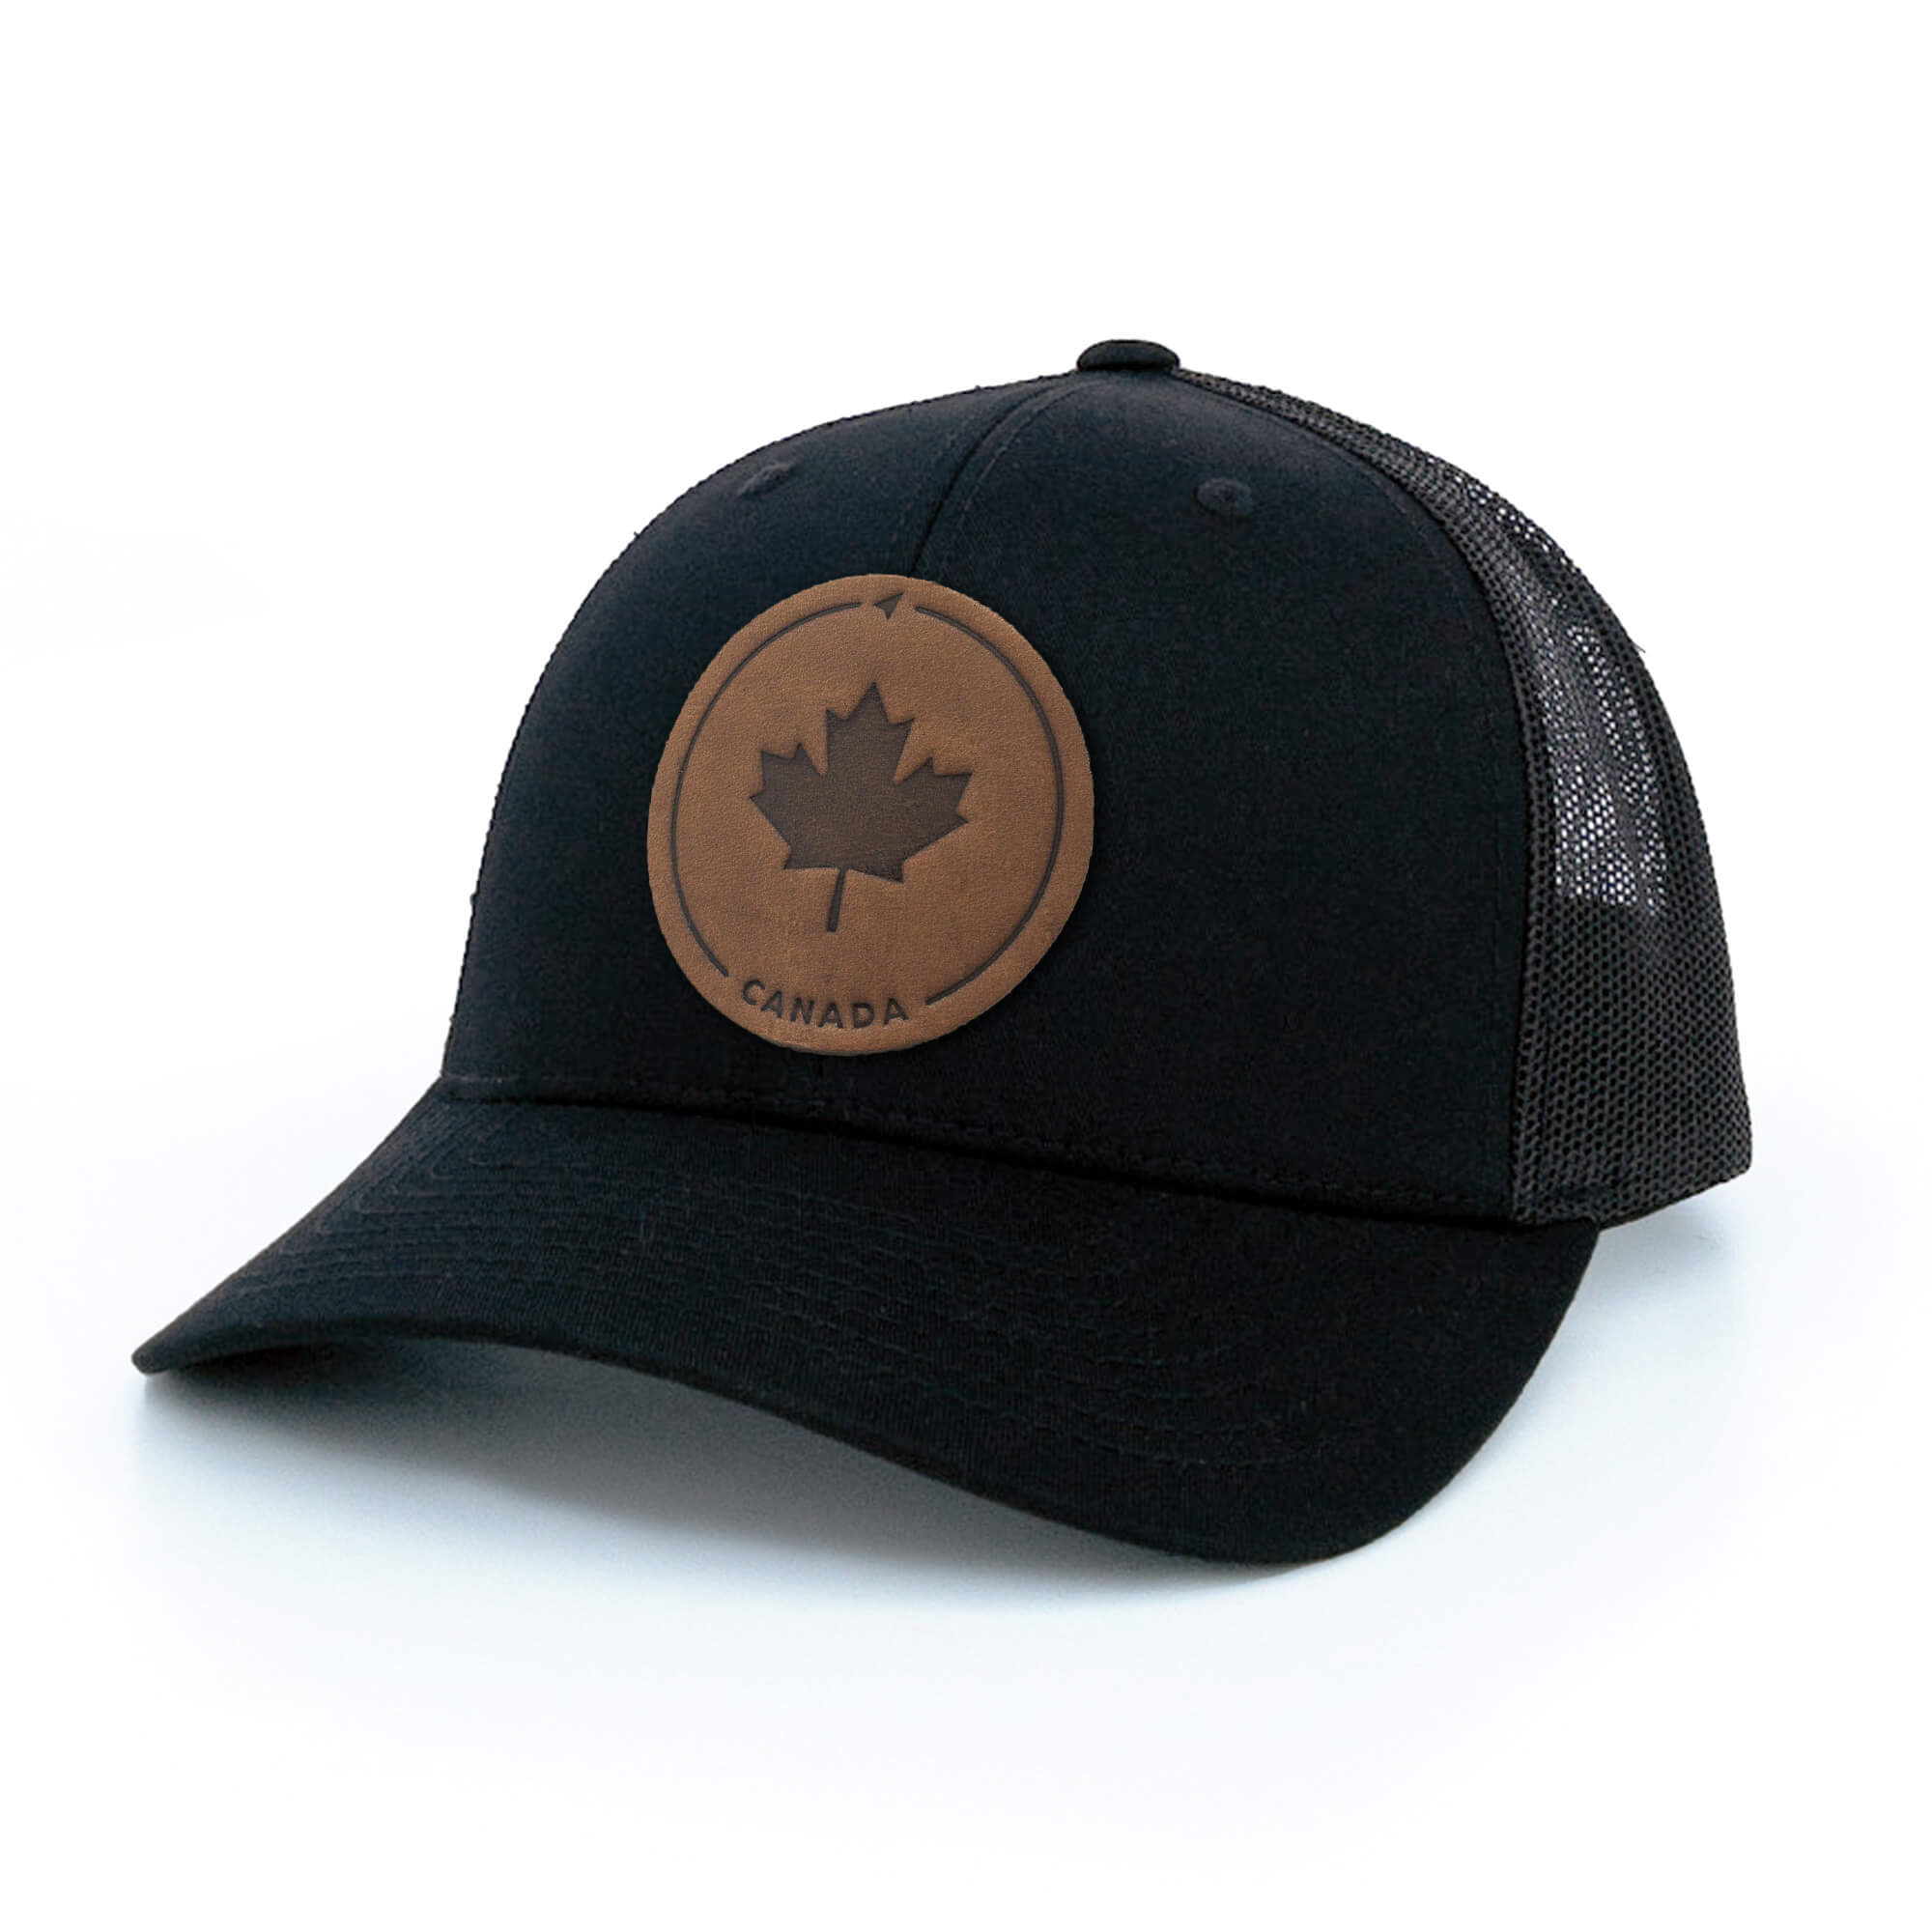 Black trucker hat with full-grain leather patch of Maple Leaf | BLACK-002-001, CHARC-002-001, NAVY-002-001, HGREY-002-001, MOSS-002-001, BROWN-002-001, RED-002-001